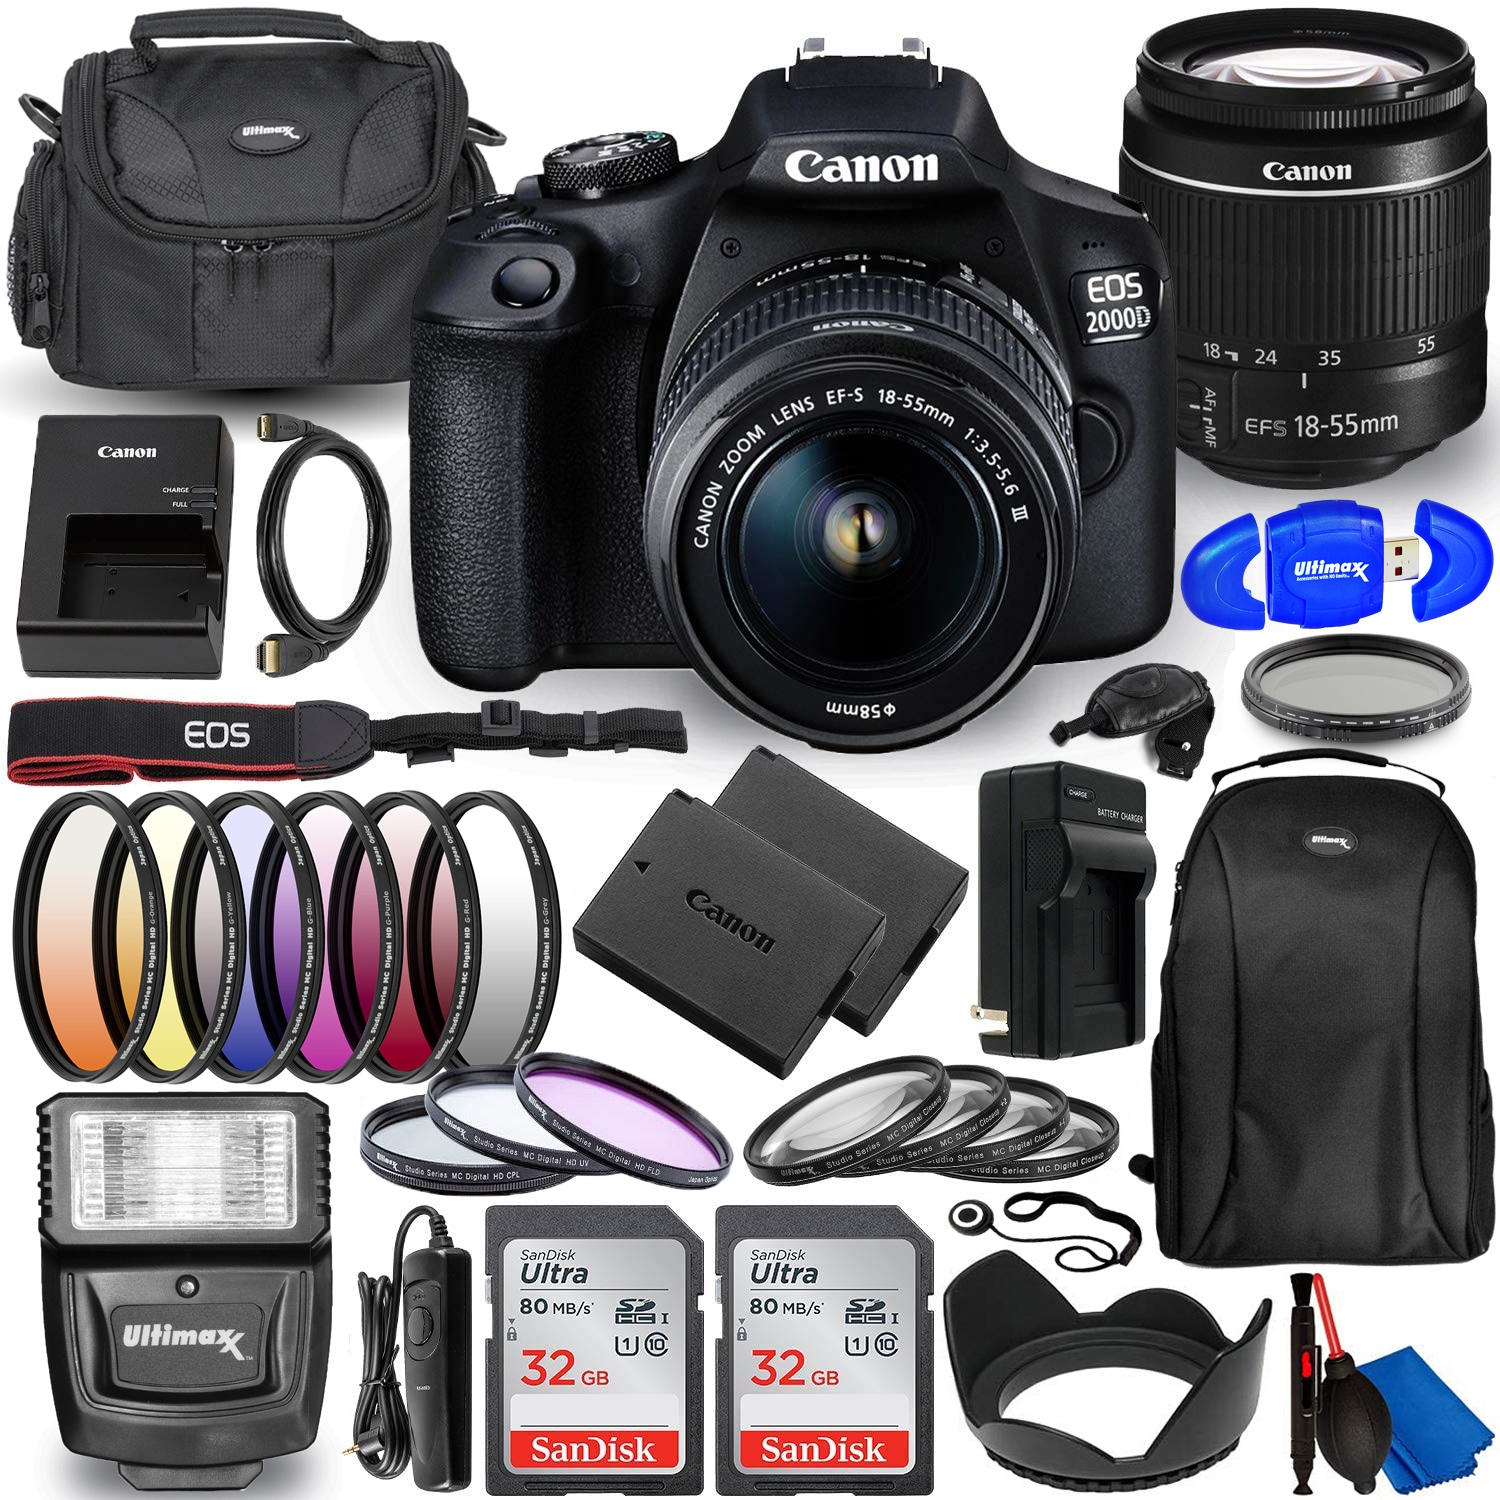 Canon EOS 2000D (Rebel T7) DSLR Camera with EF-S 18-55mm DC III Lens - Deluxe Bundle Includes: Dual Ultra 32GB (64GB) SD, Extra Battery and Charger, LED Light Kit, Case and More